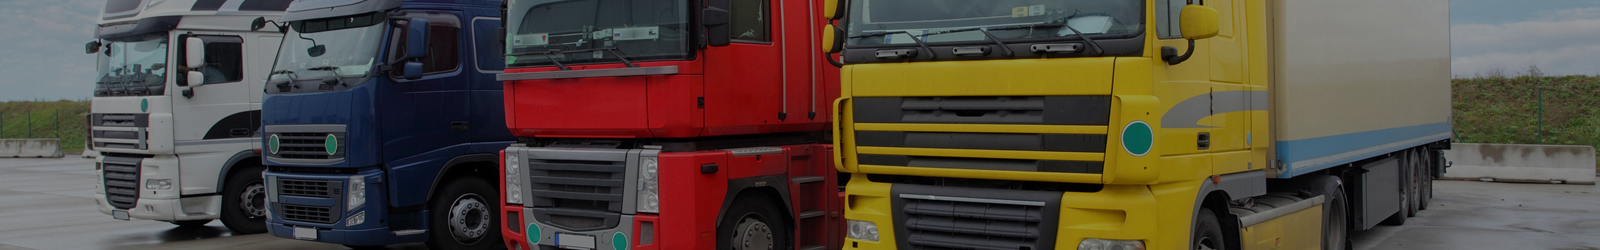 haulage sector banner